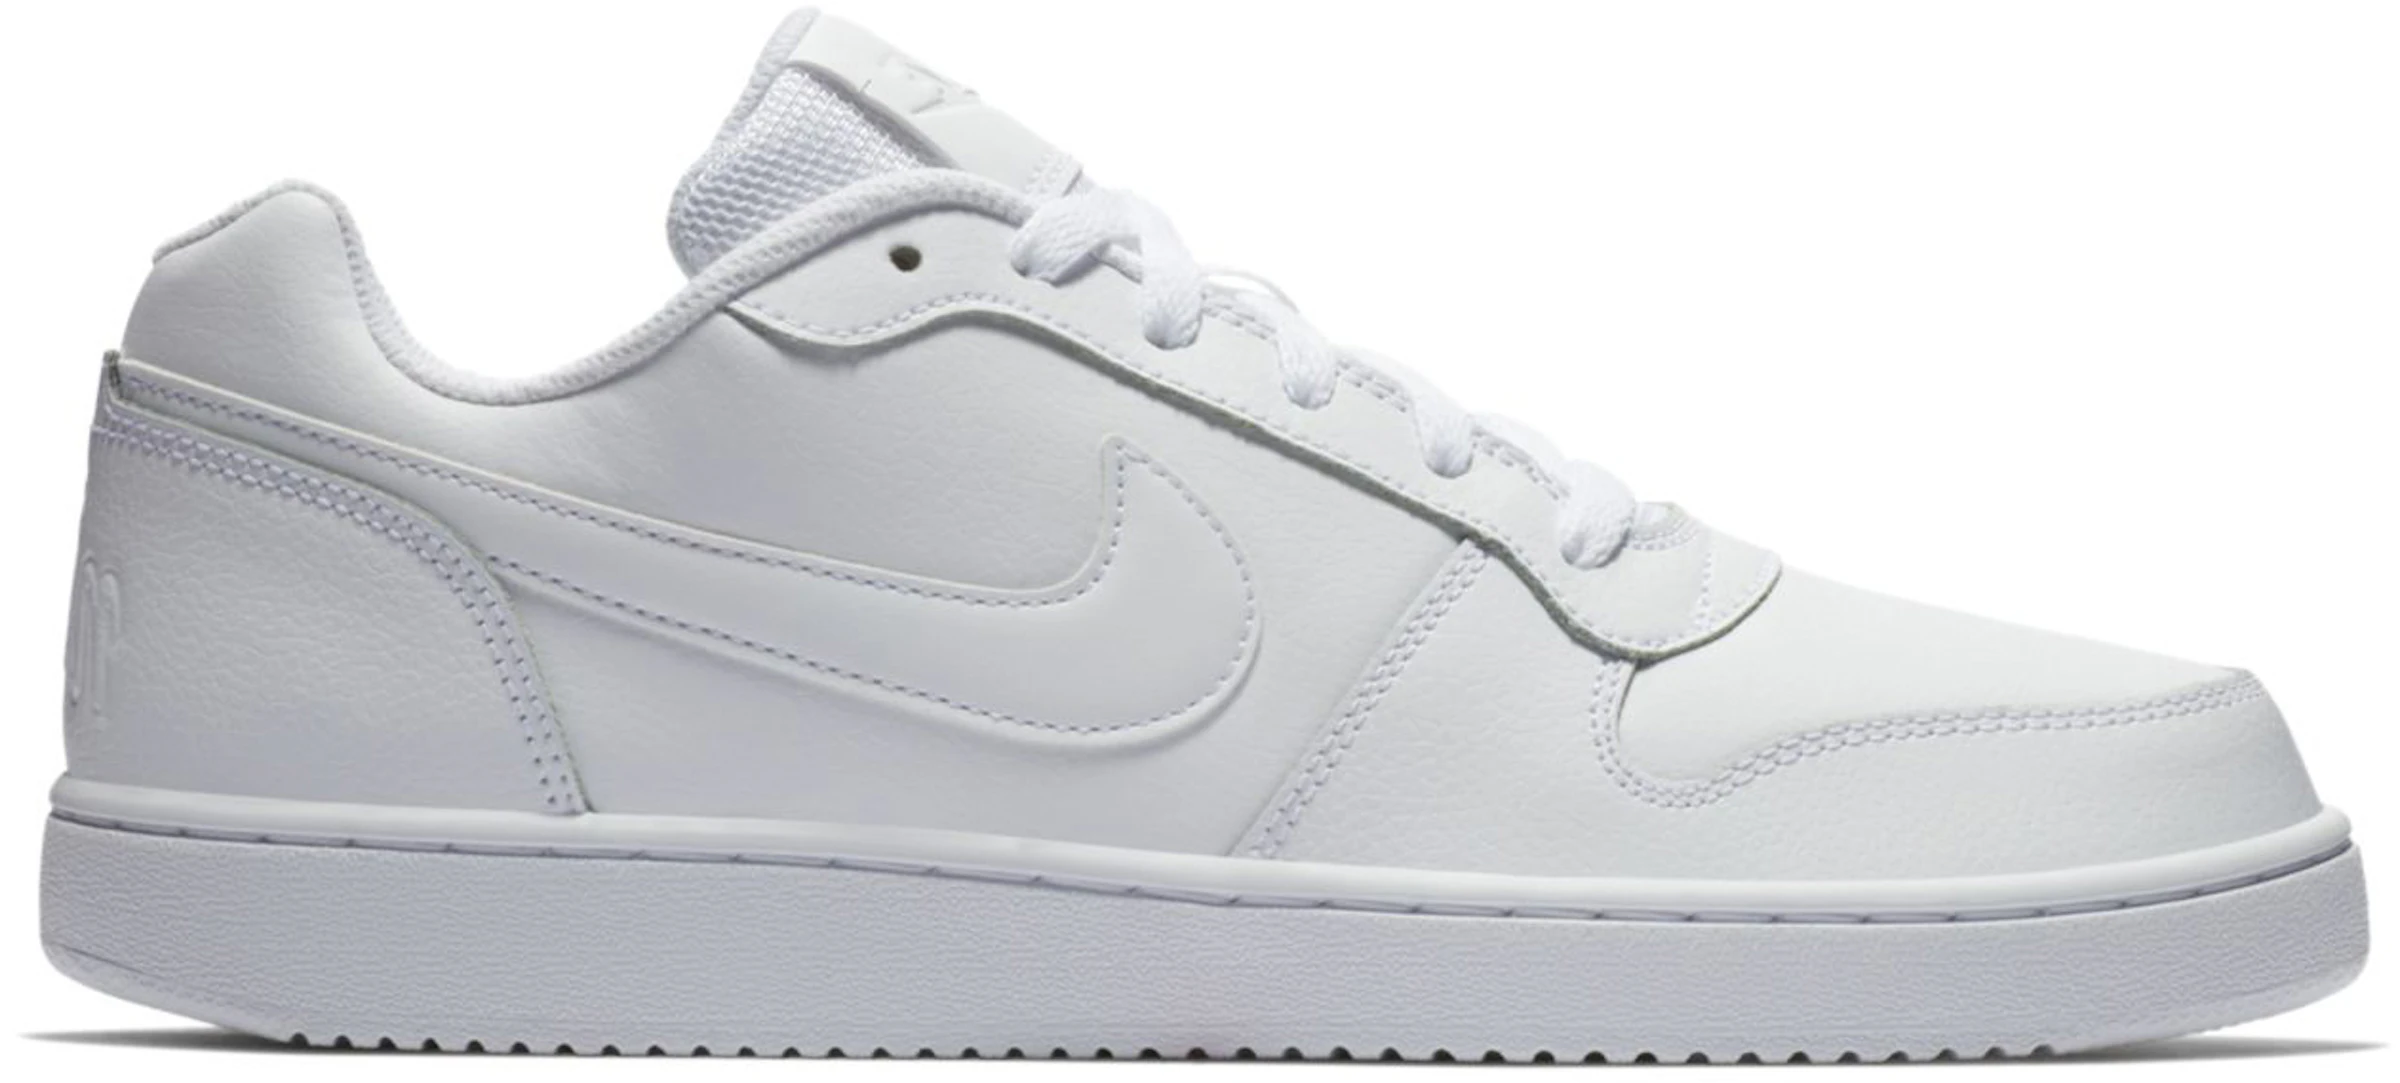 manager Zuigeling Augment Nike Ebernon Low Triple White - AQ1775-100 - US